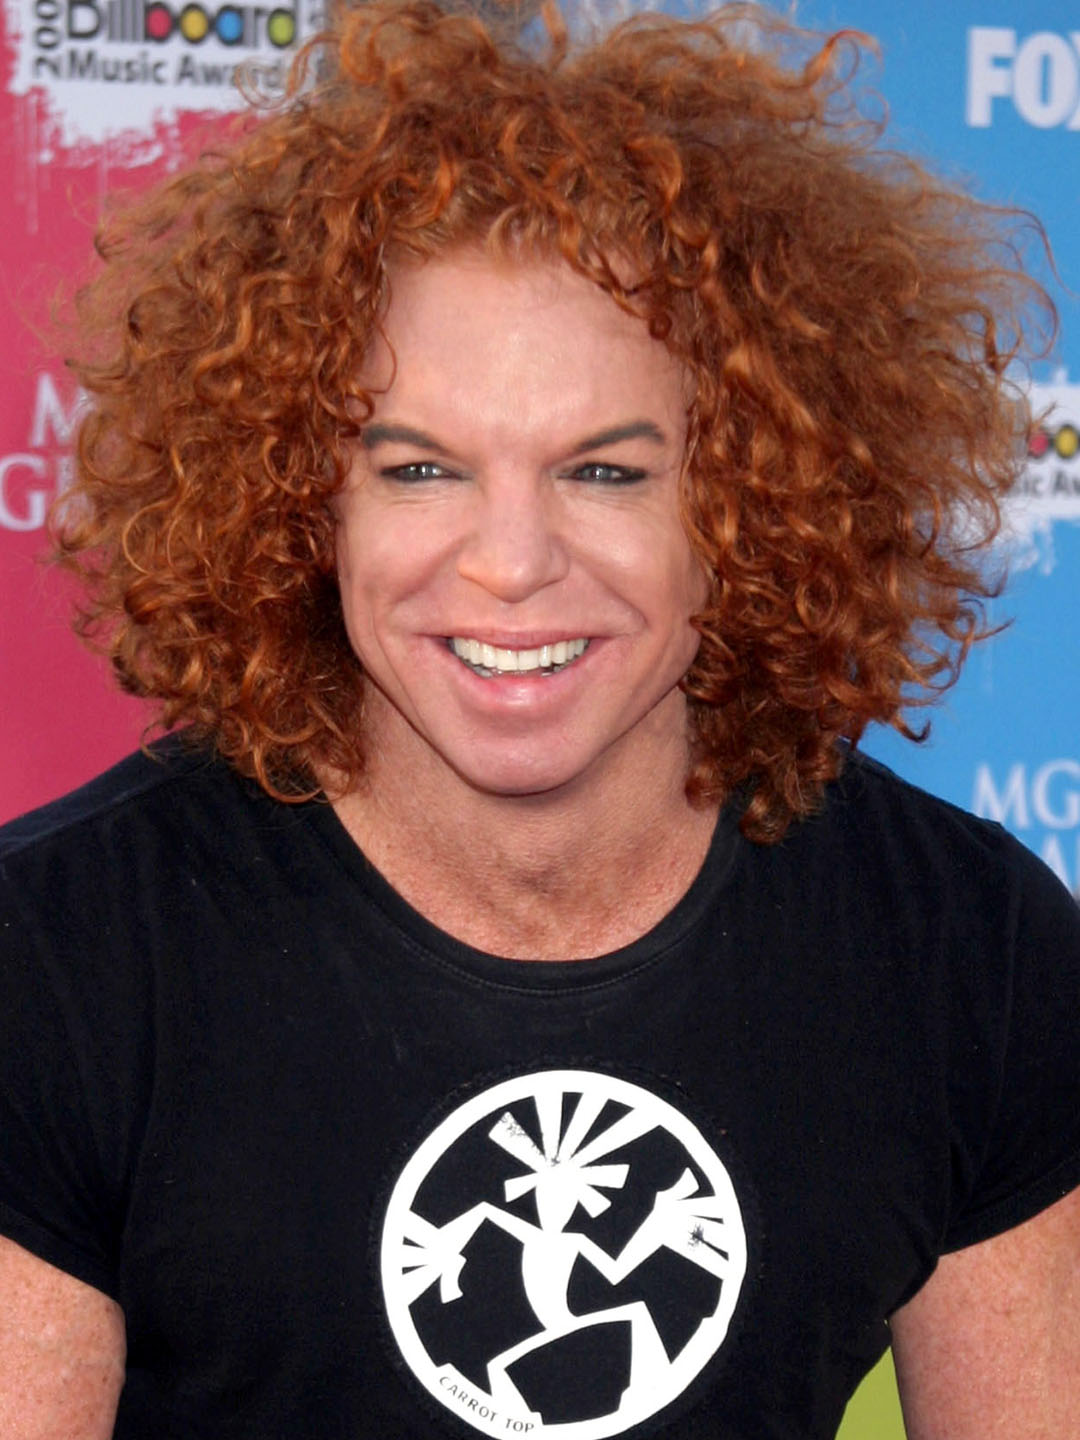 How tall is Carrot Top?